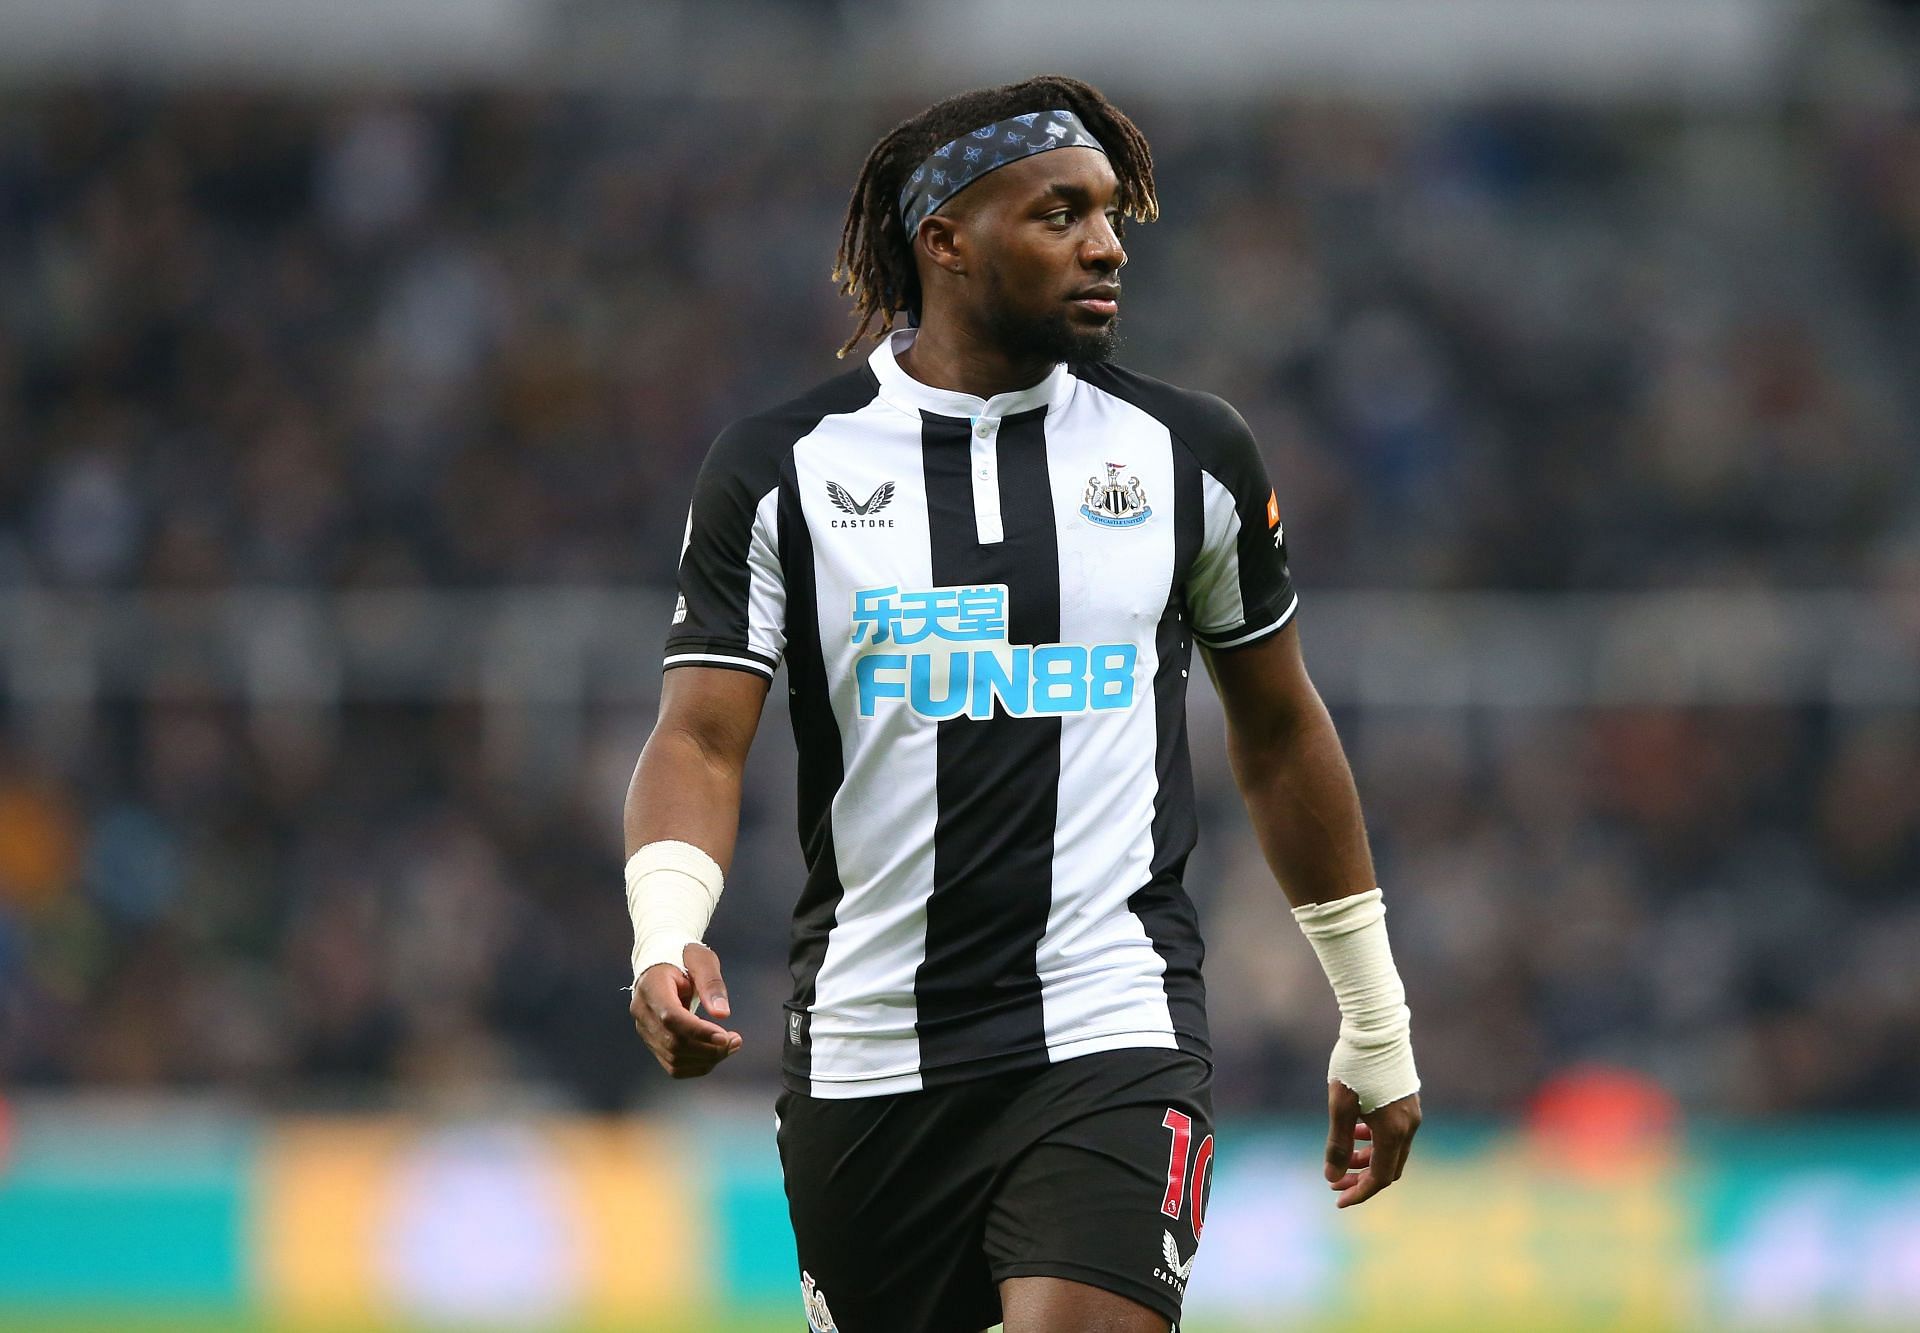 Saint-Maximin will be a huge miss for Newcastle